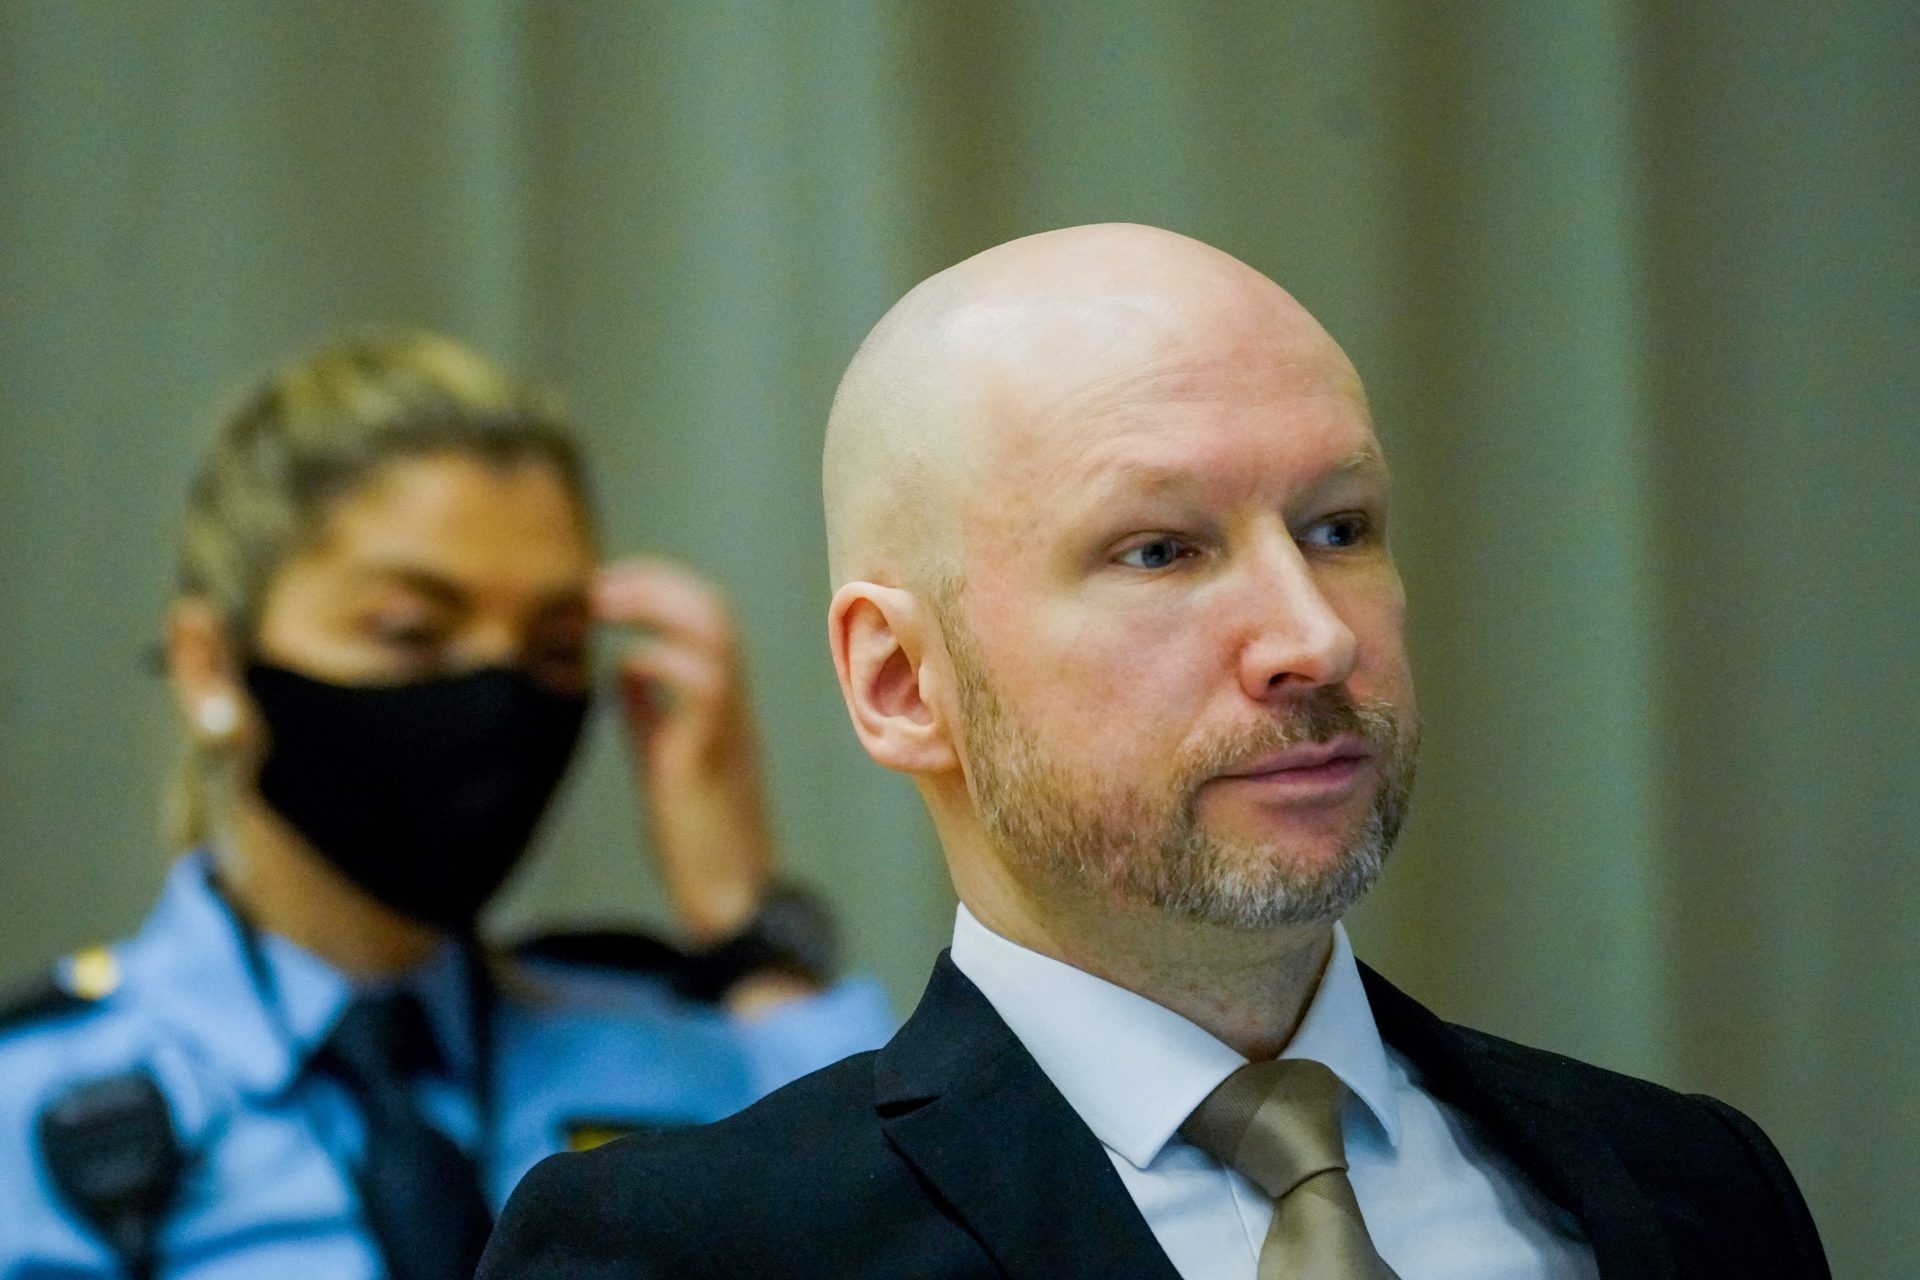 Anders Breivik complains about his conditions of detention